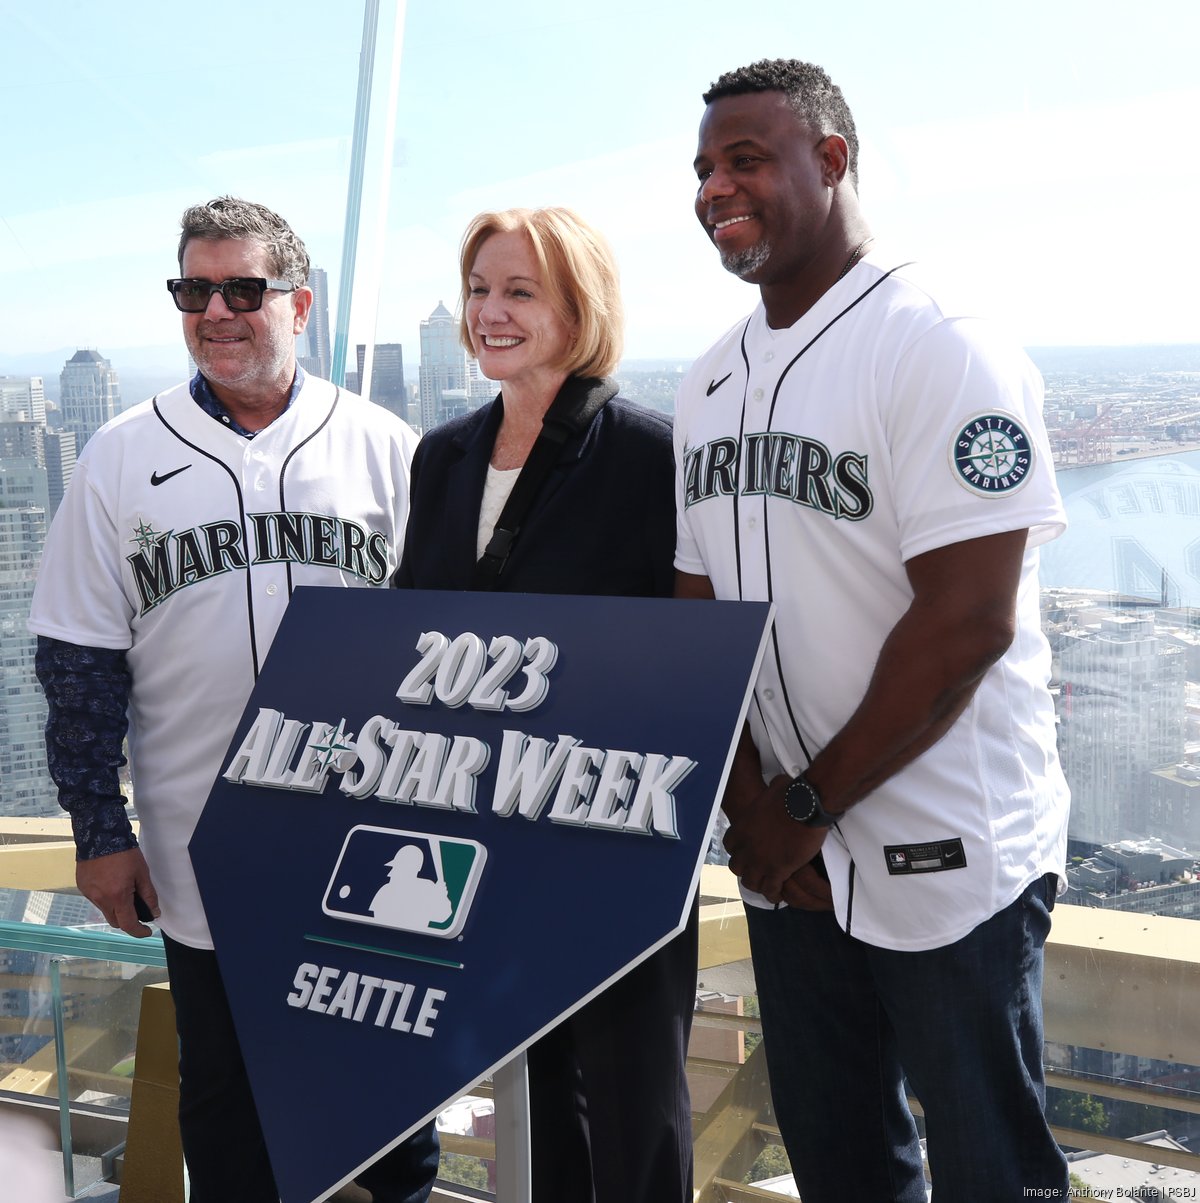 How Many Seattle Mariners Are Going to Make the 2023 All-Star